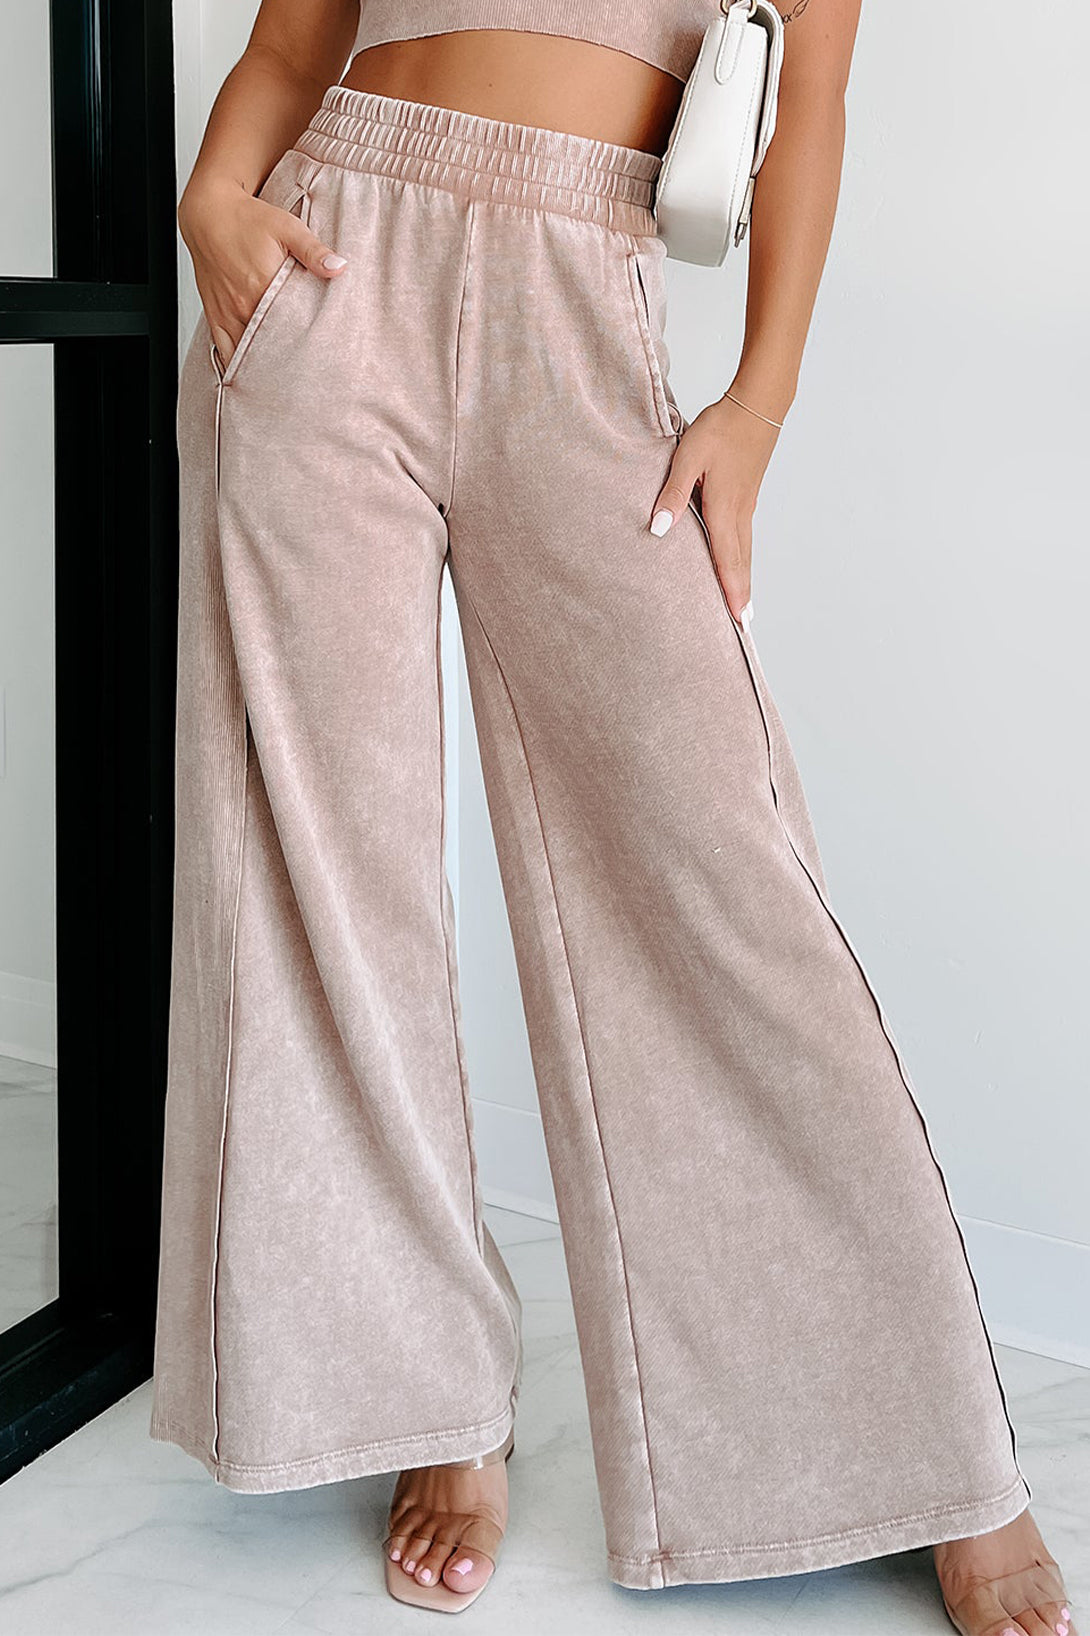 Pale Chestnut Mineral Wash Smocked Waistband Wide Leg Pants